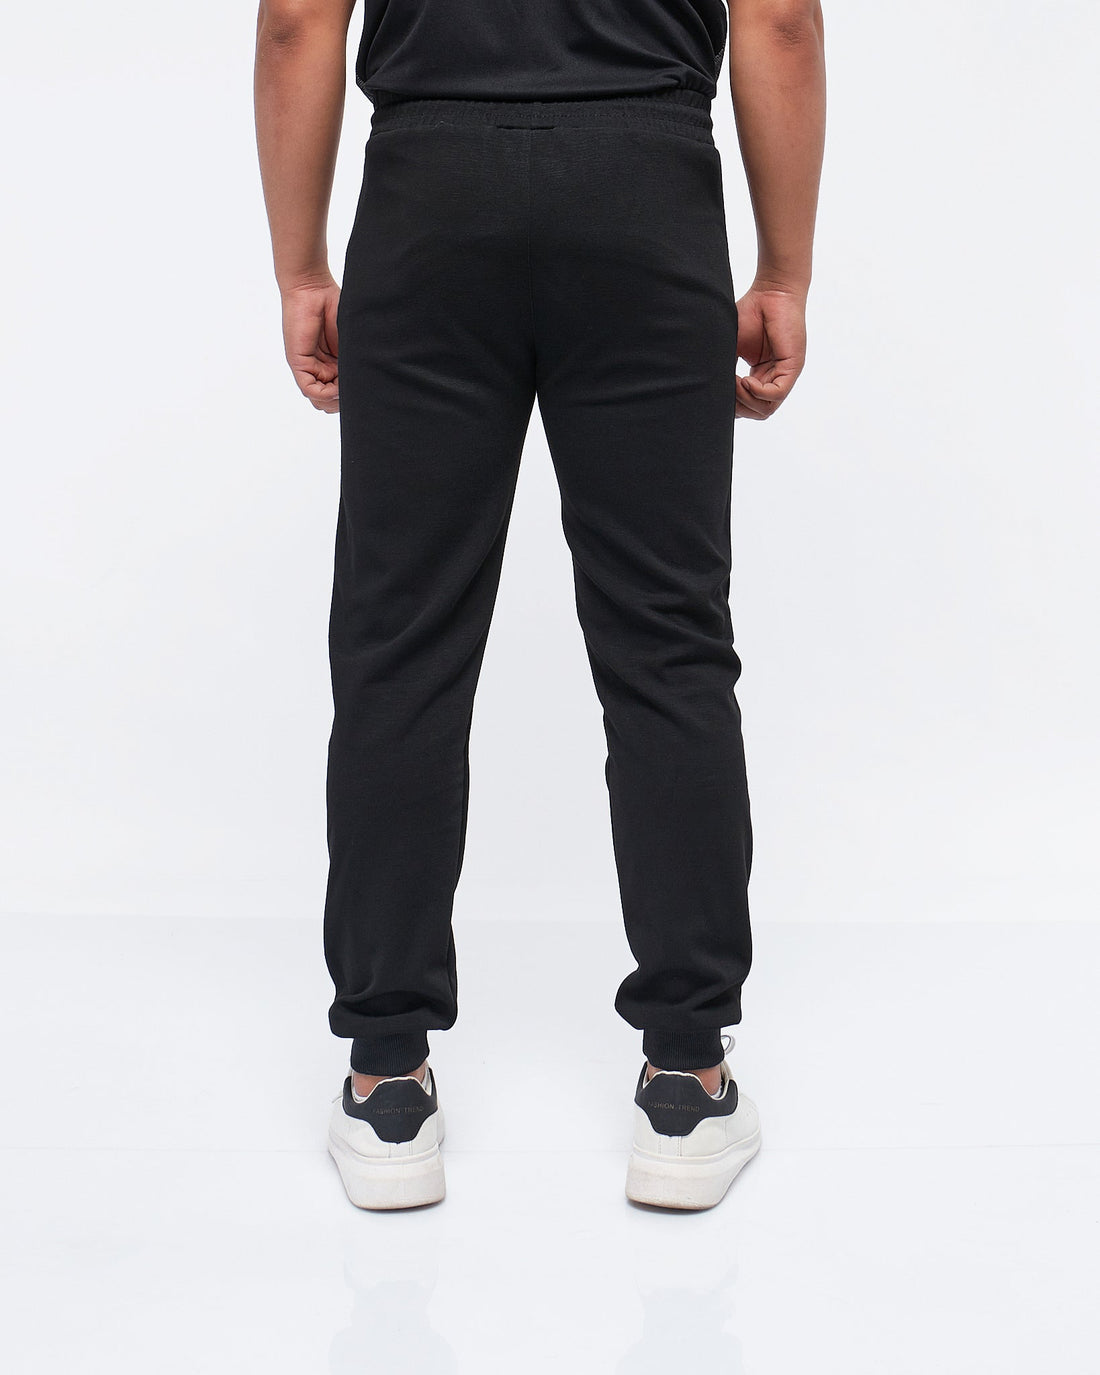 MOI OUTFIT-Double Swooh Logo Printed Men Joggers 14.90